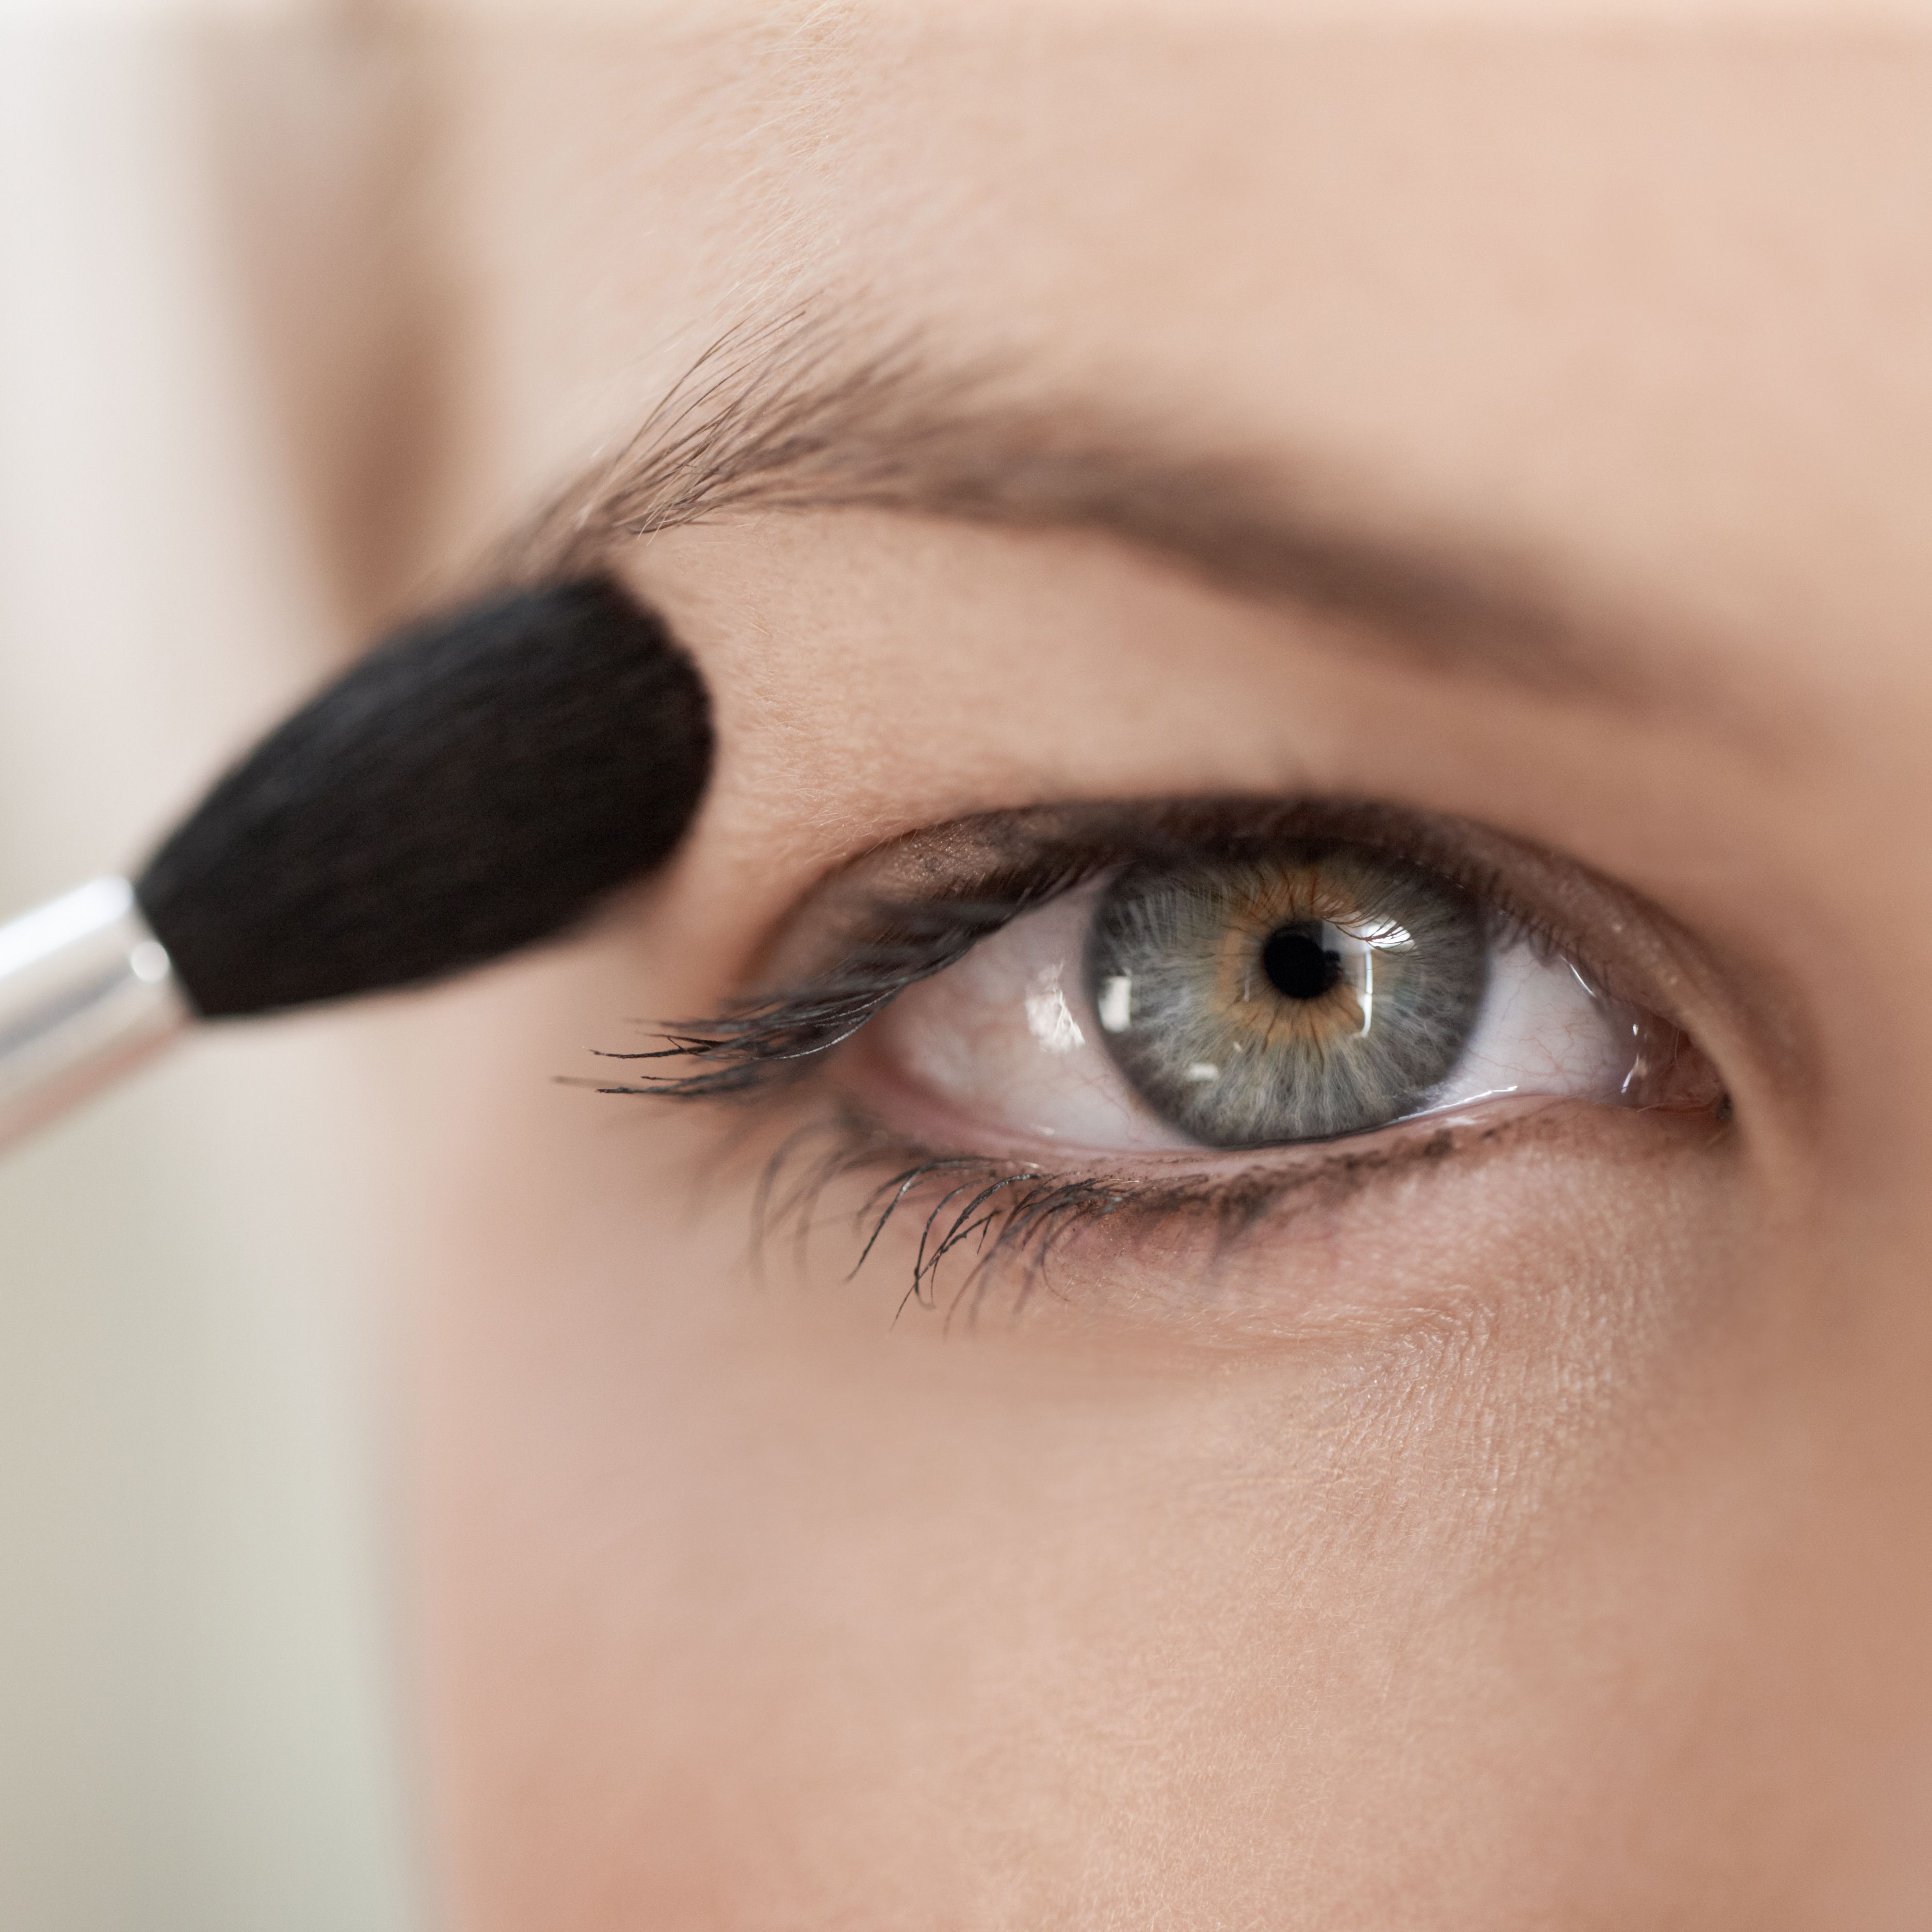 Eyes Pictures With Makeup Makeup Tricks For Hooded Eyes Hooded Eyes Makeup Tips And Tricks